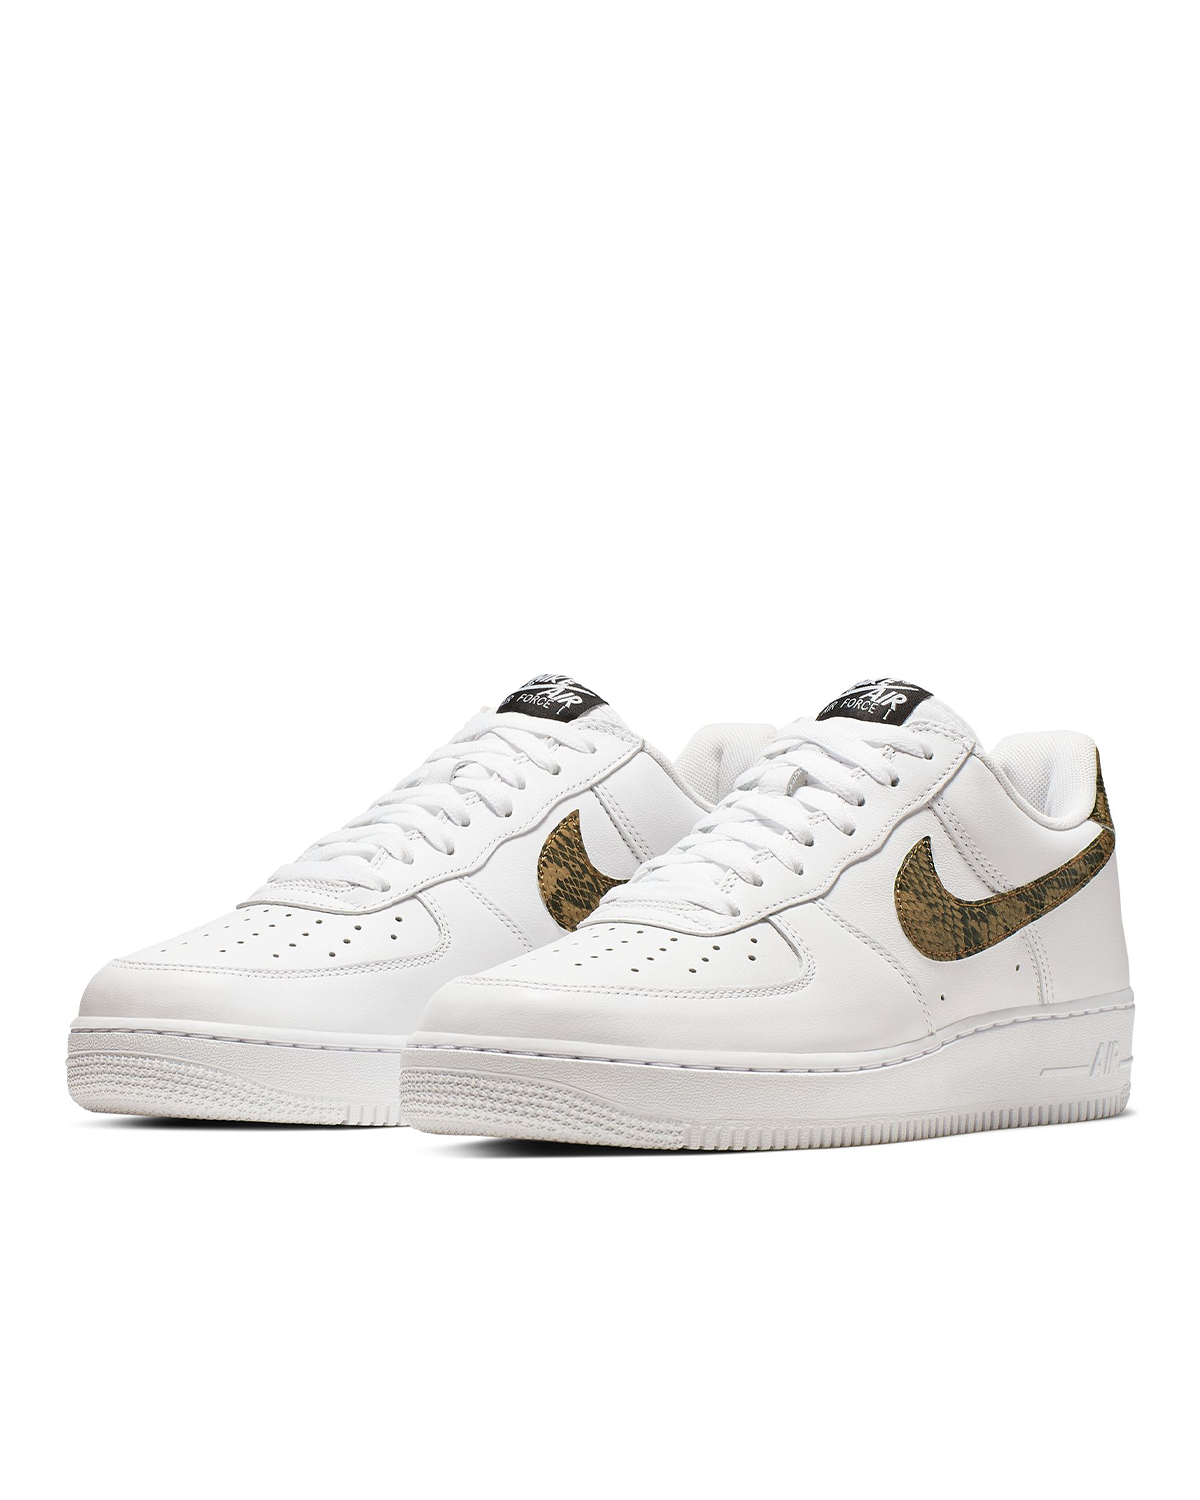 Air Force 1 Low Retro Prm 'Ivory Snake'